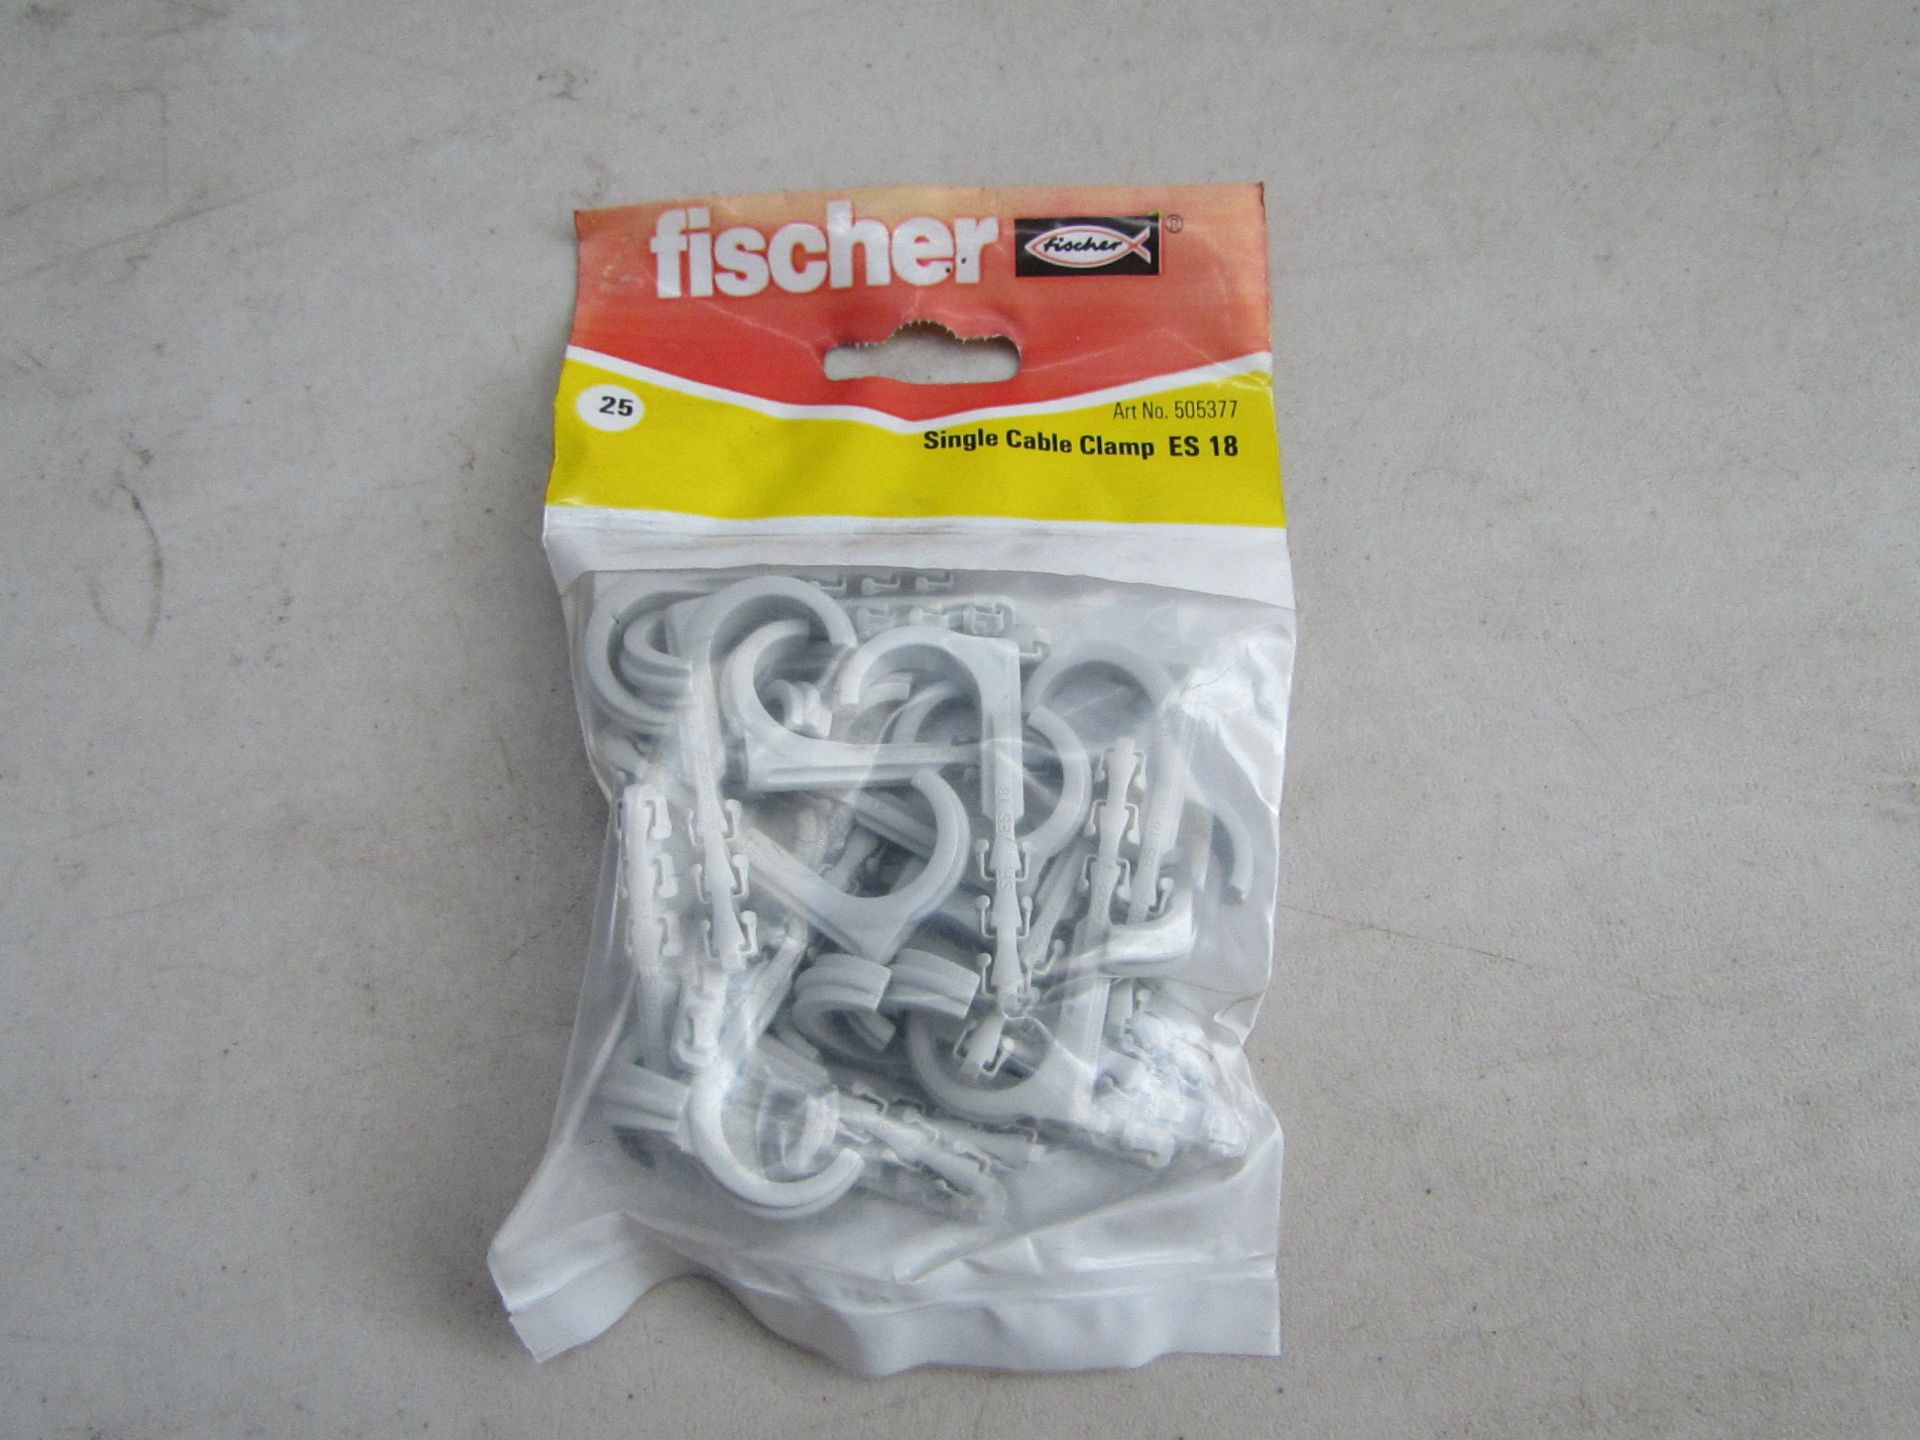 5x packs of 25x single cable clamp (ES 18), all new in packaging